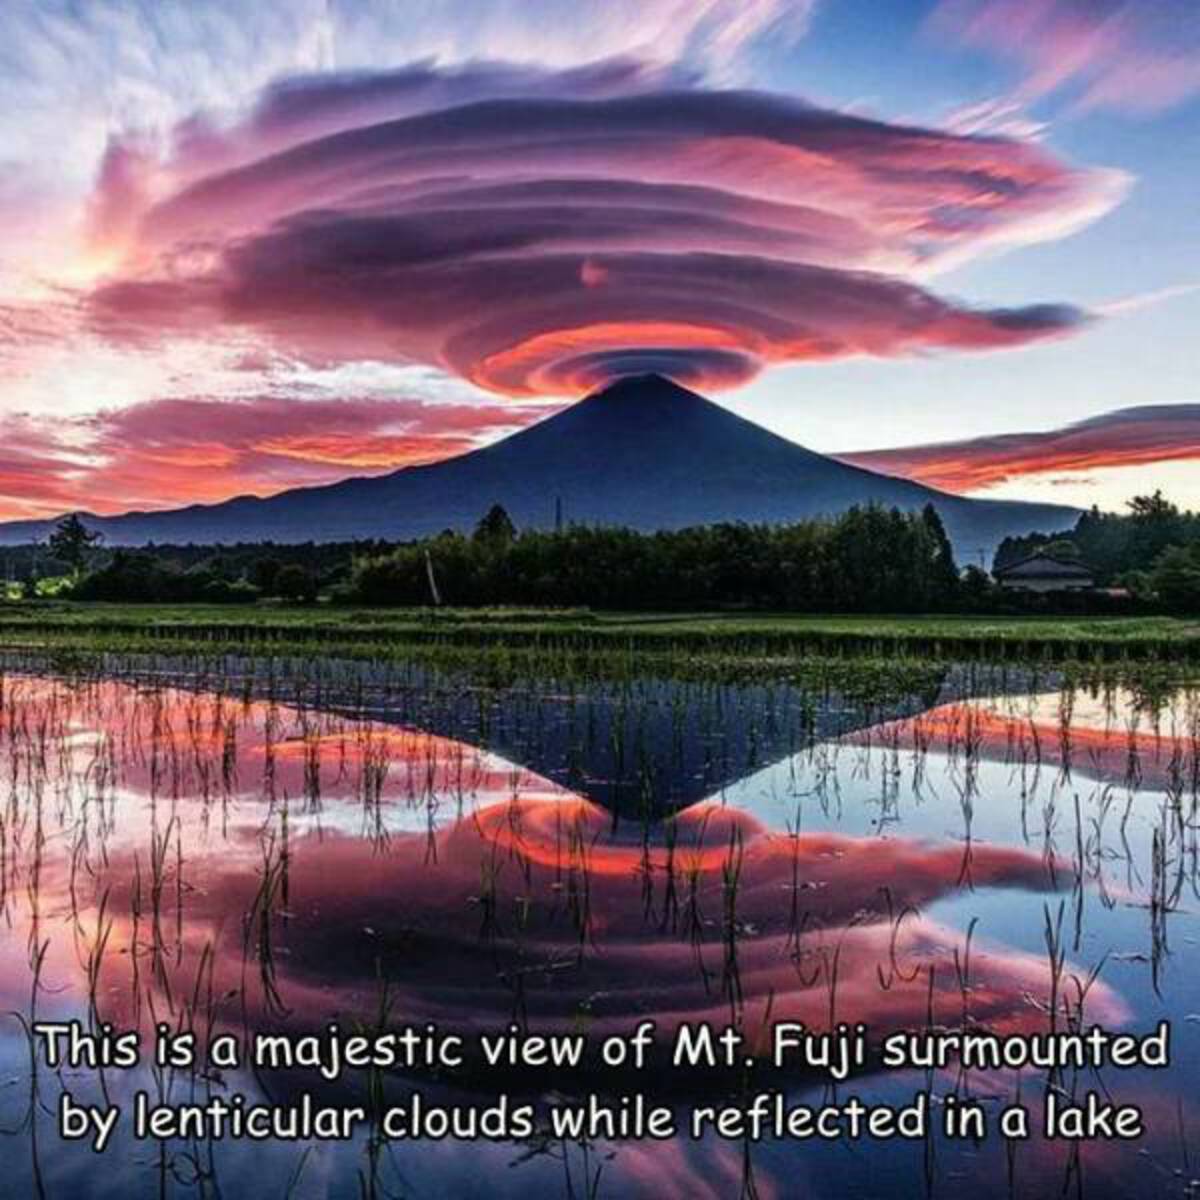 mount fuji reflecting in lake tanuki japan - This is a majestic view of Mt. Fuji surmounted by lenticular clouds while reflected in a lake